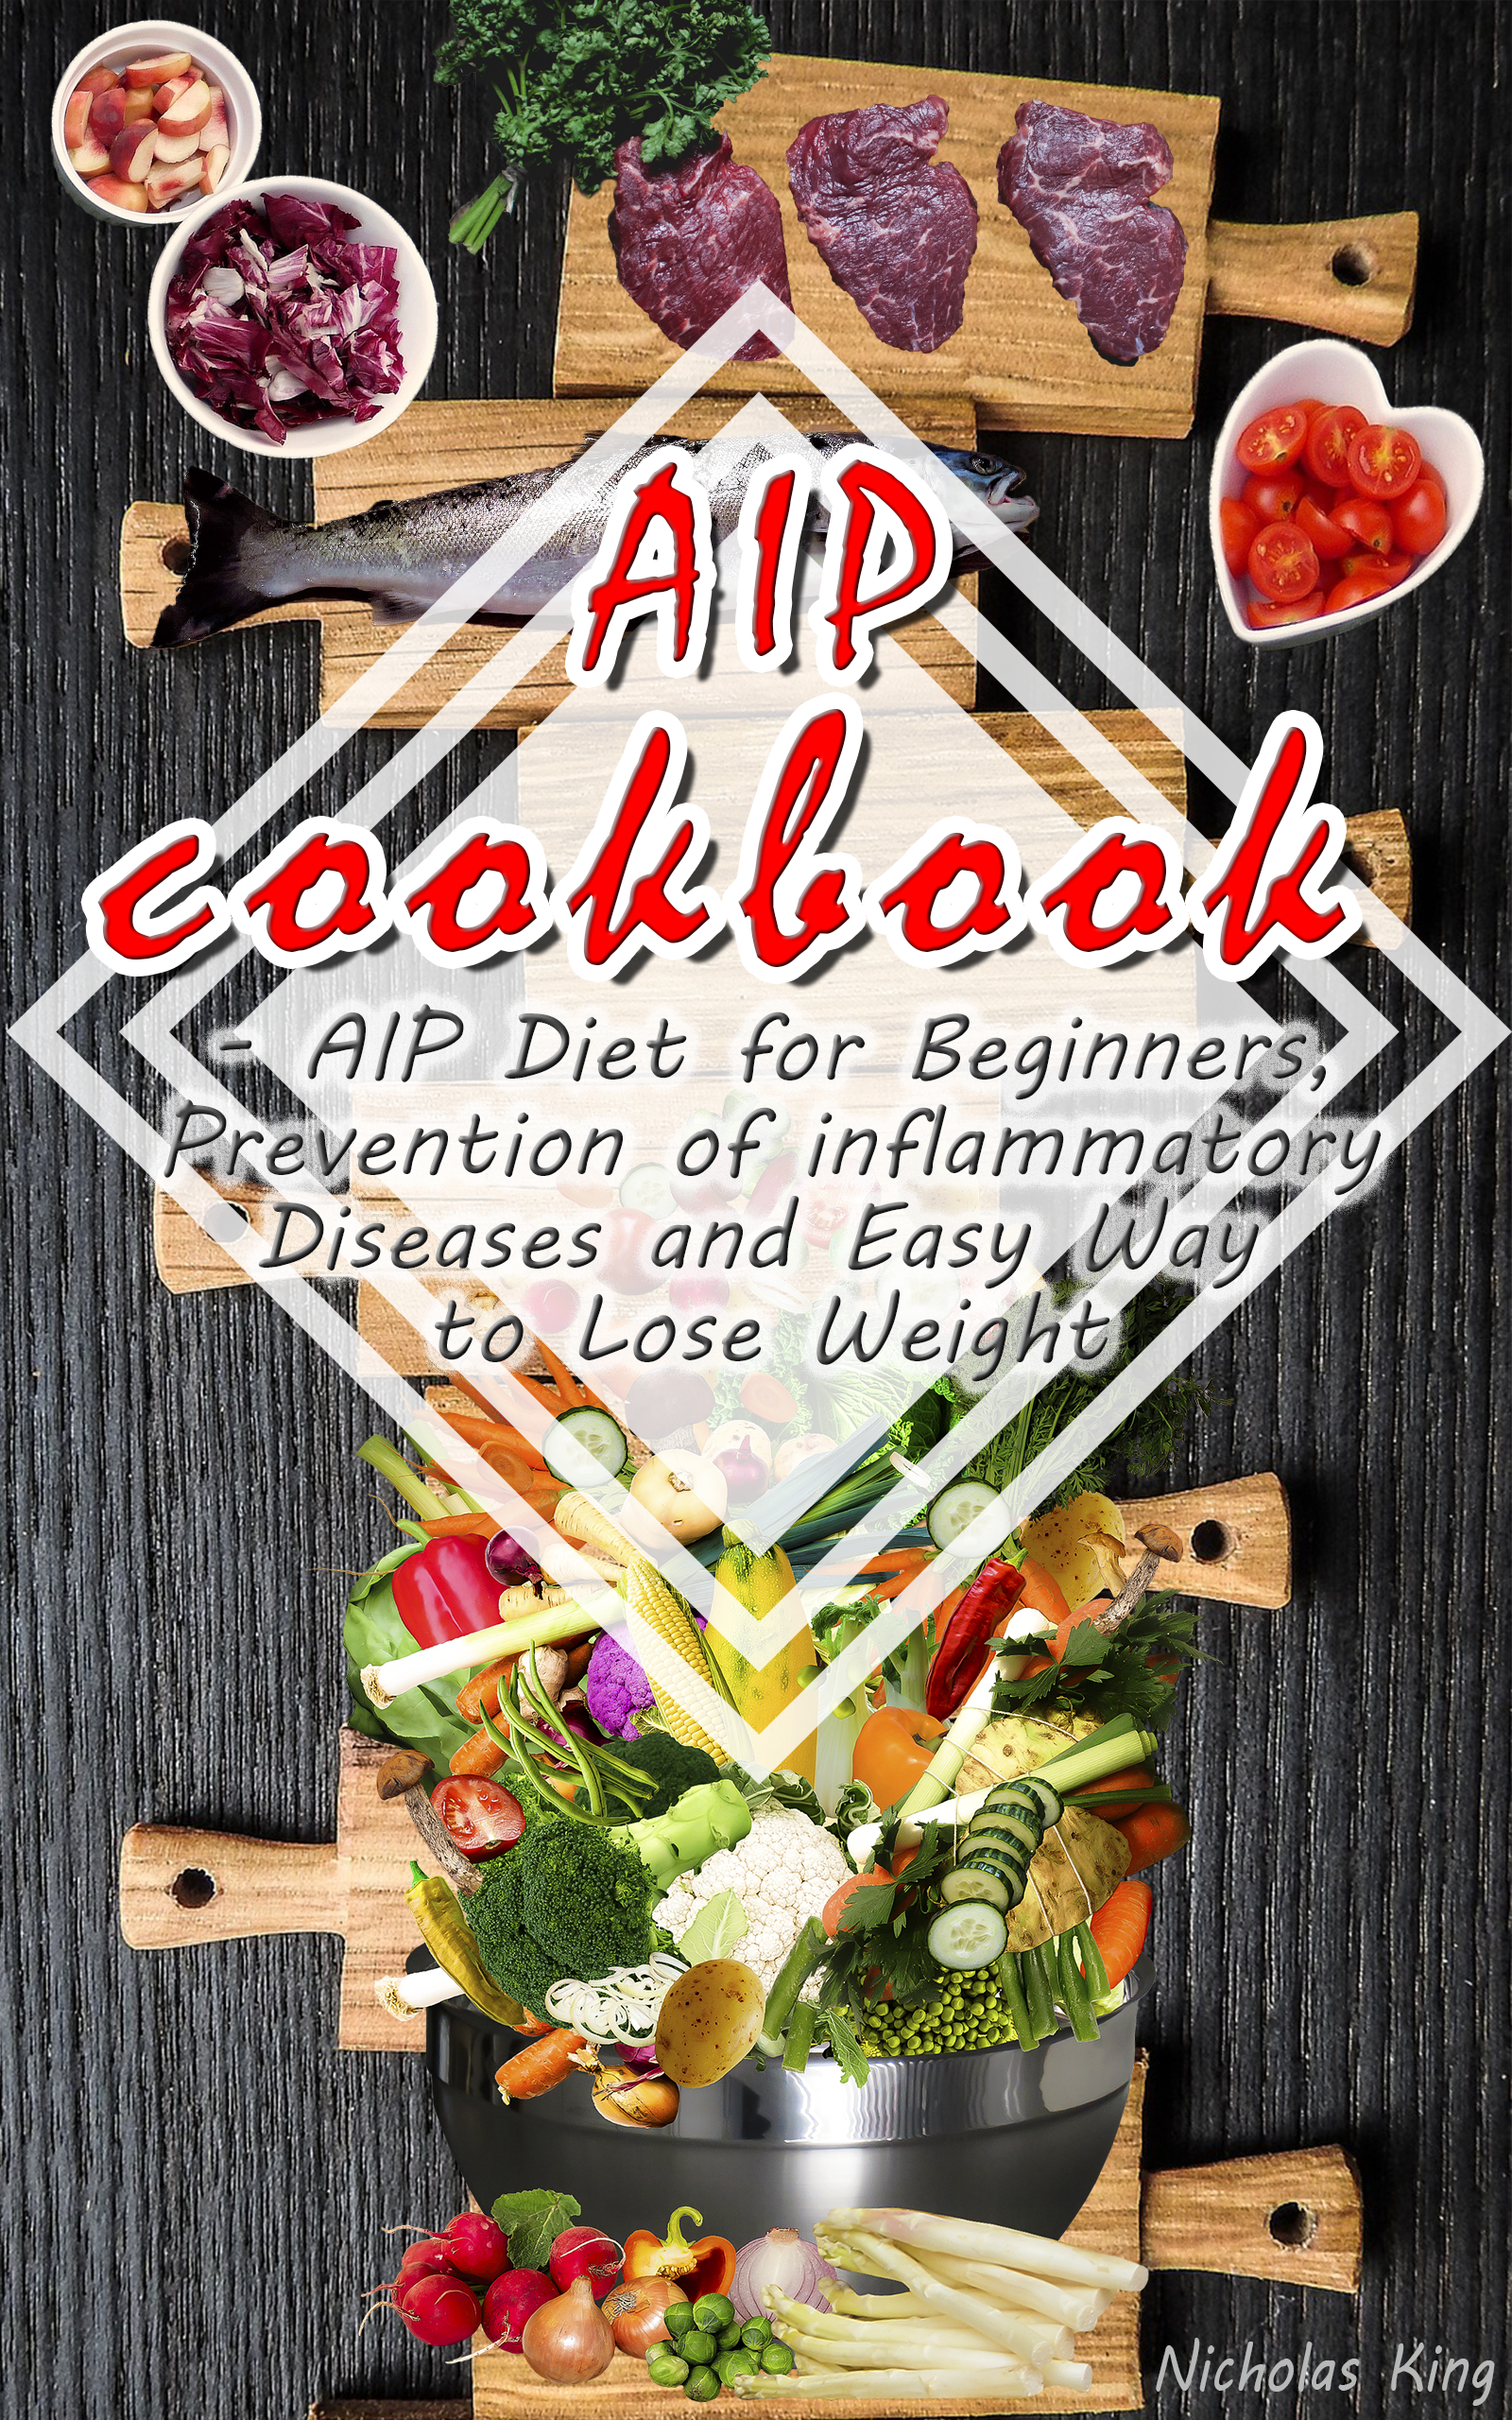 FREE: AIP Cookbook: AIP Diet for Beginners, Prevention of inflammatory Diseases and Easy Way to Lose Weight, Paleo Diet, AIP Paleo Cookbook by Nicholas King